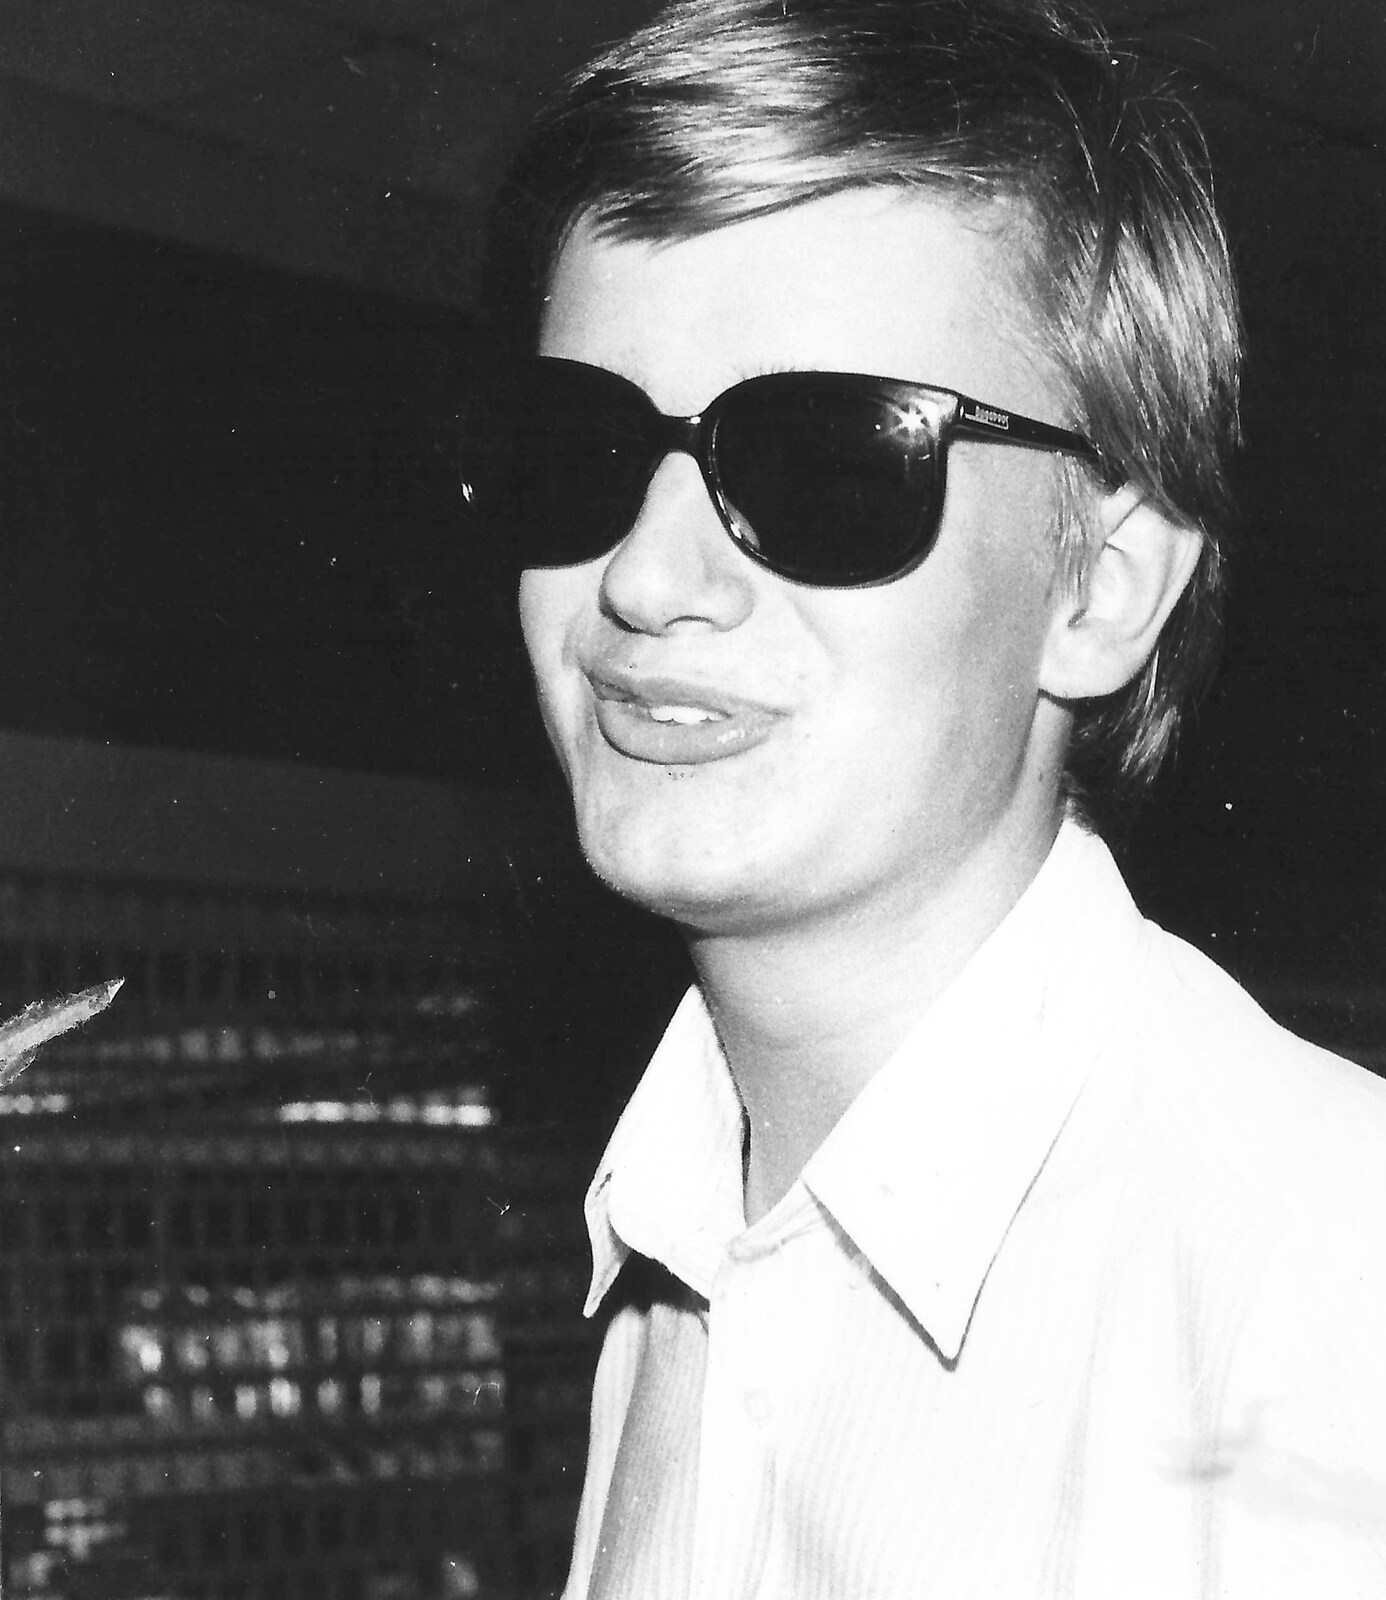 Nosher with some crazy shades from Uni: The First Year in Black and White, Plymouth Polytechnic, Devon - 8th April 1986